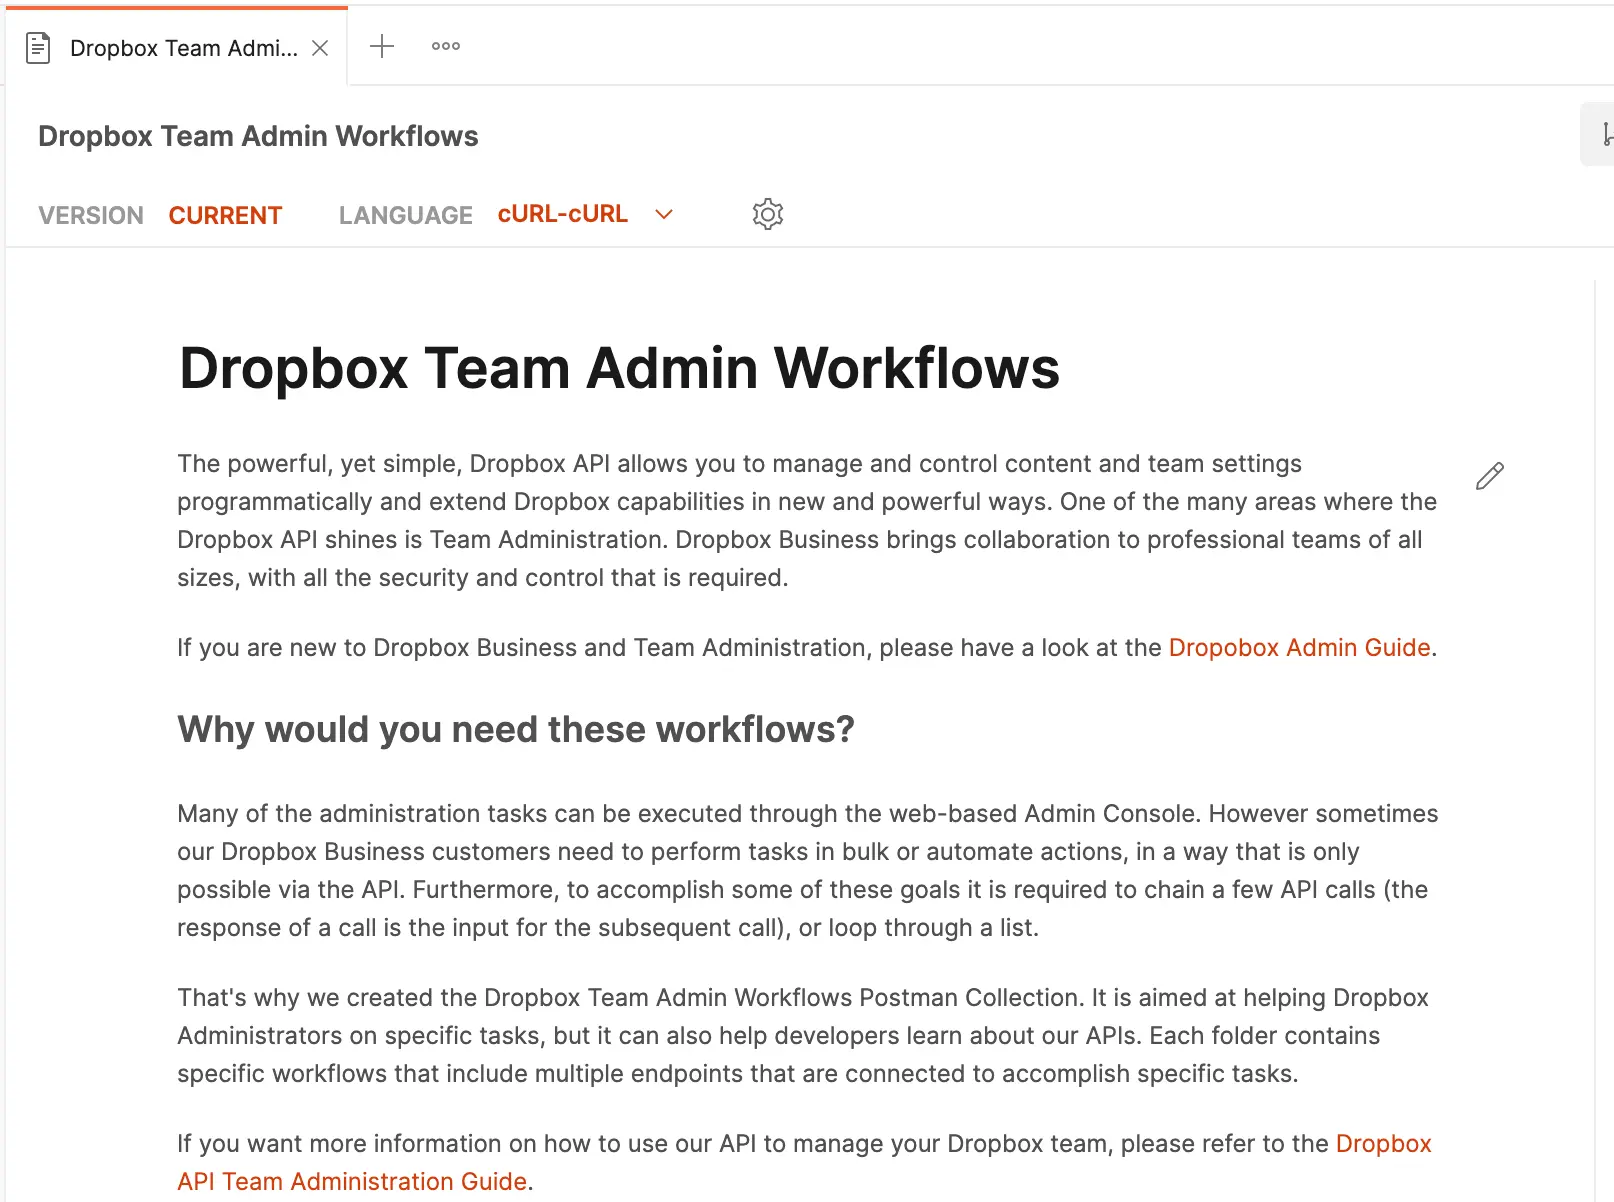 Documentation for the Dropbox Team Admin Workflows collection